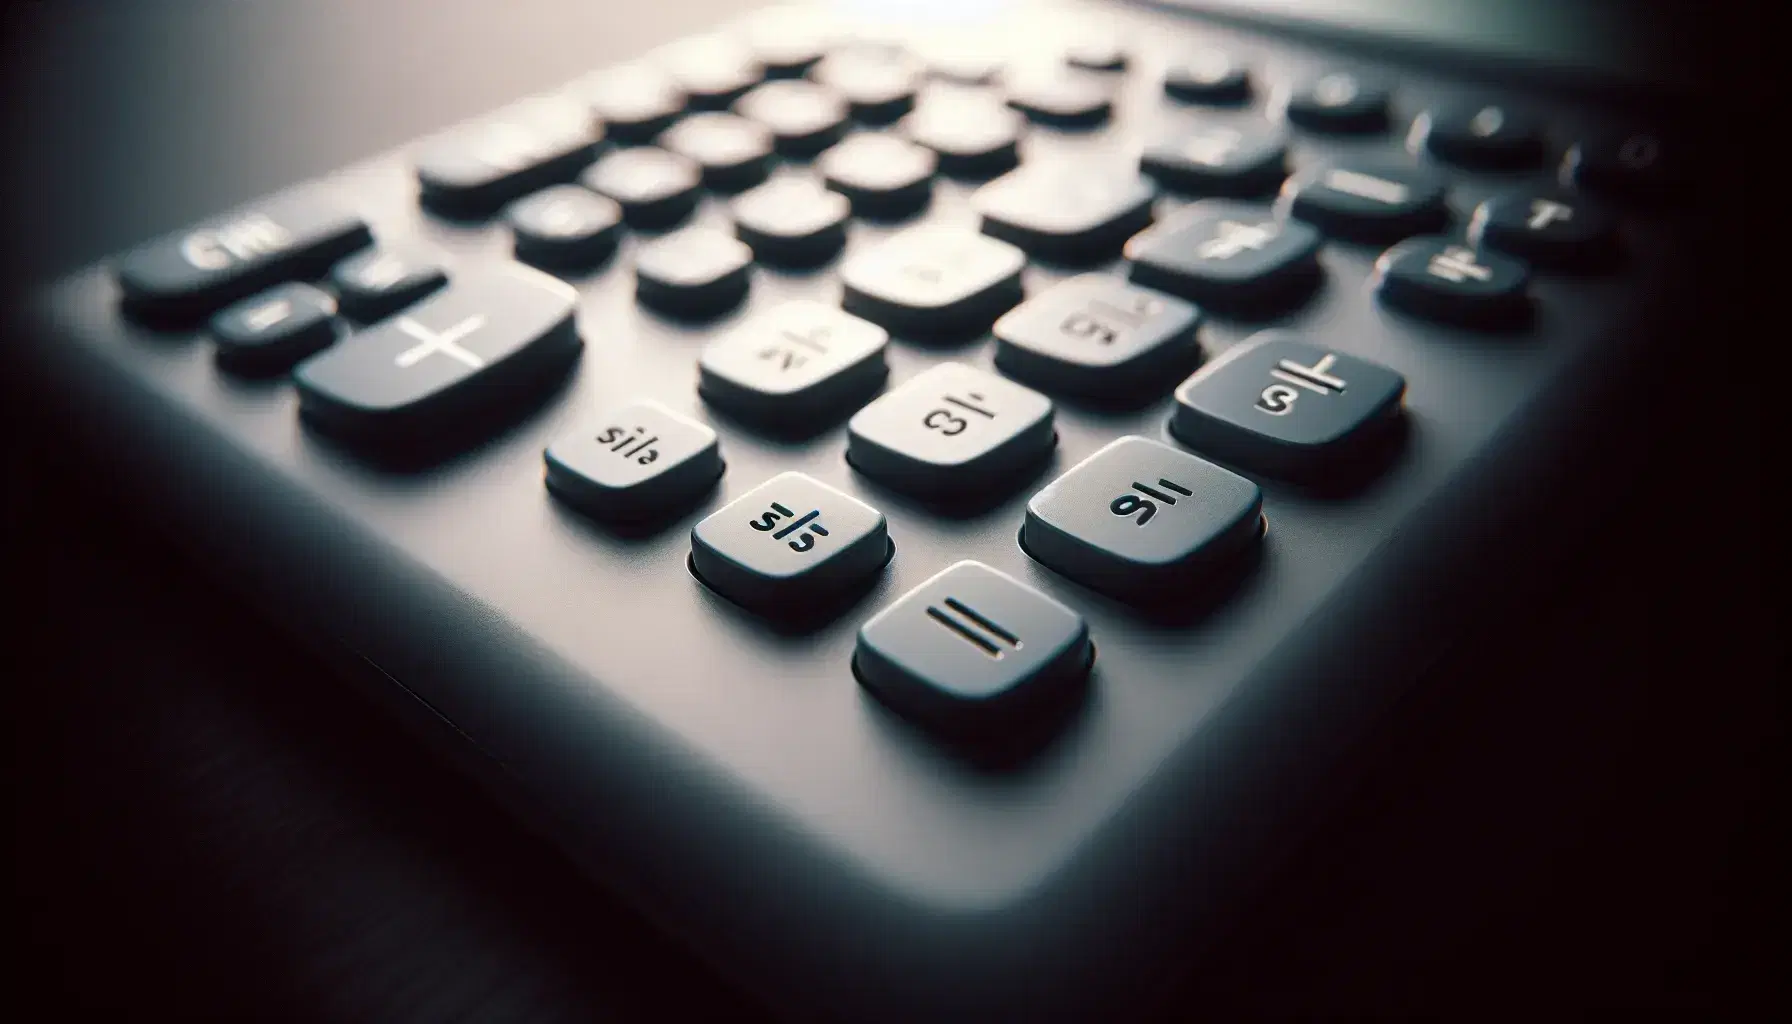 Close-up view of a scientific calculator's matte gray trigonometric function keys, neatly arranged with subtle shadows, against a blurred background.